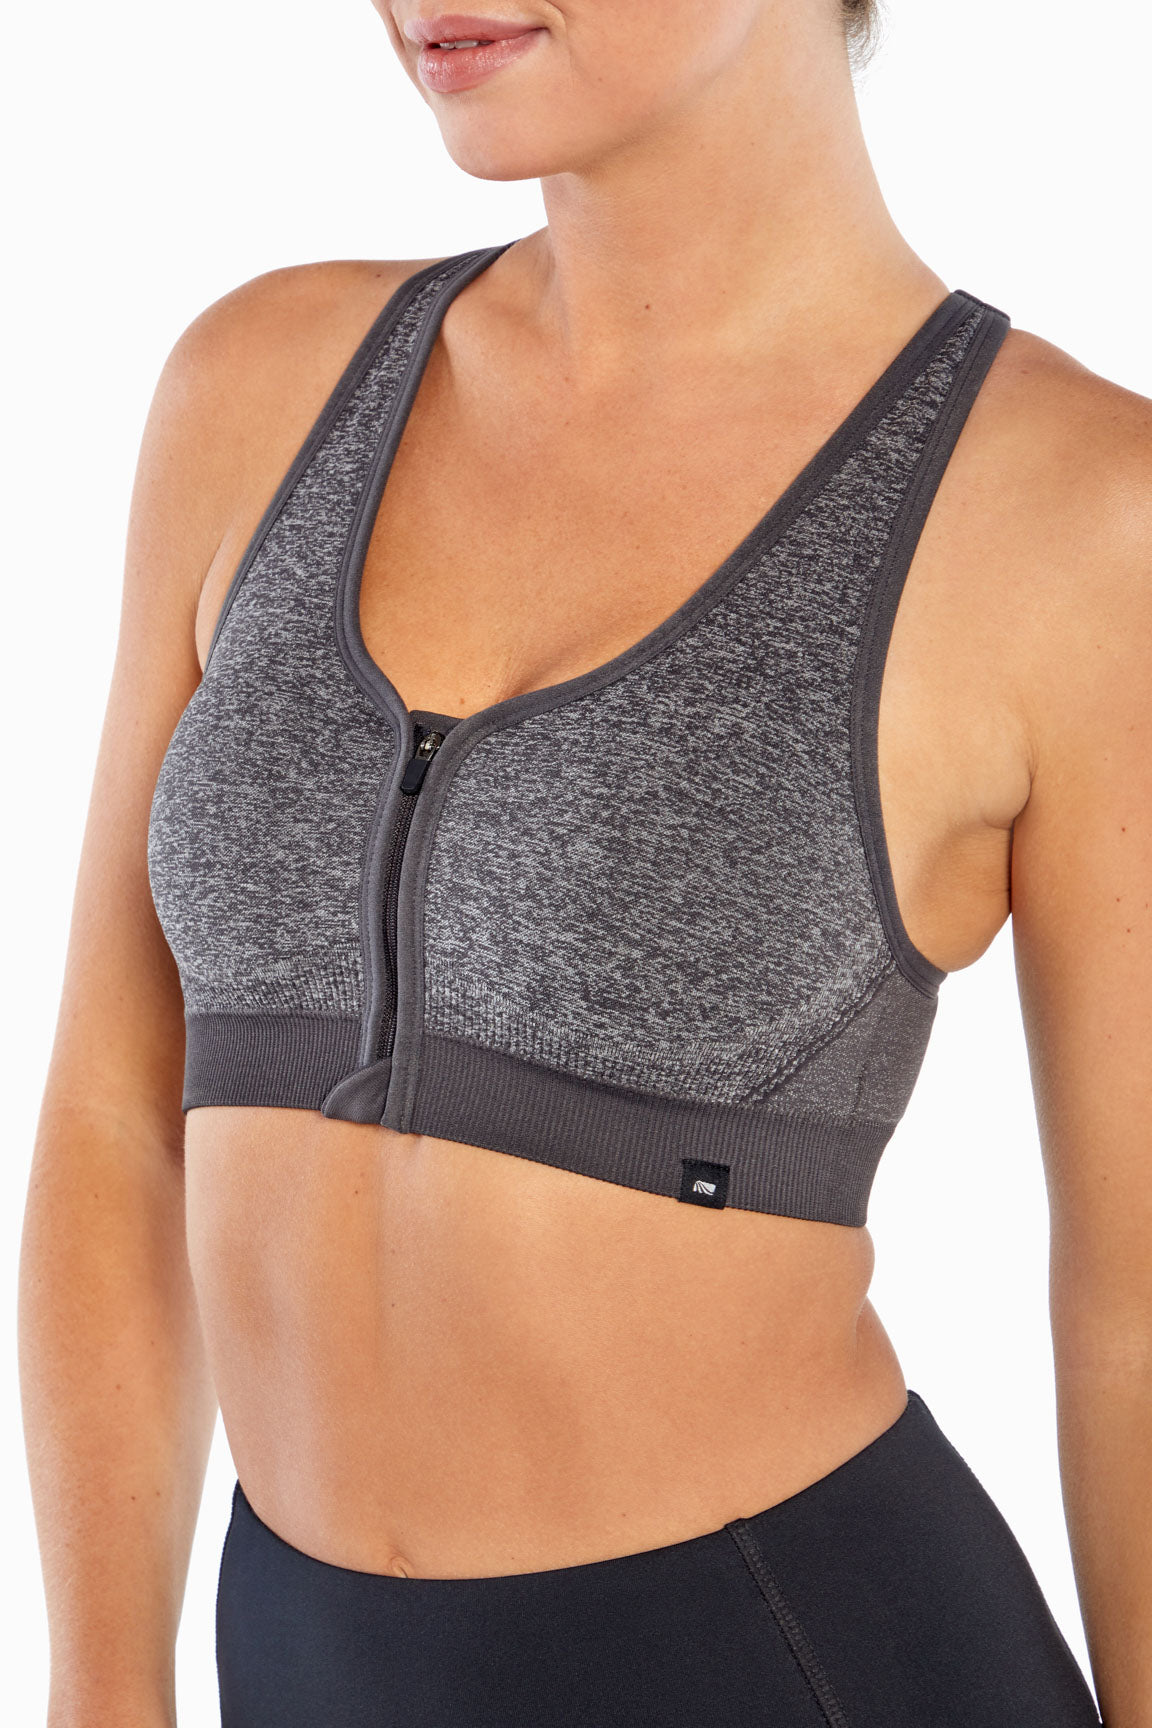 Find more Sports Bras Size 14 for sale at up to 90% off - Regina, SK